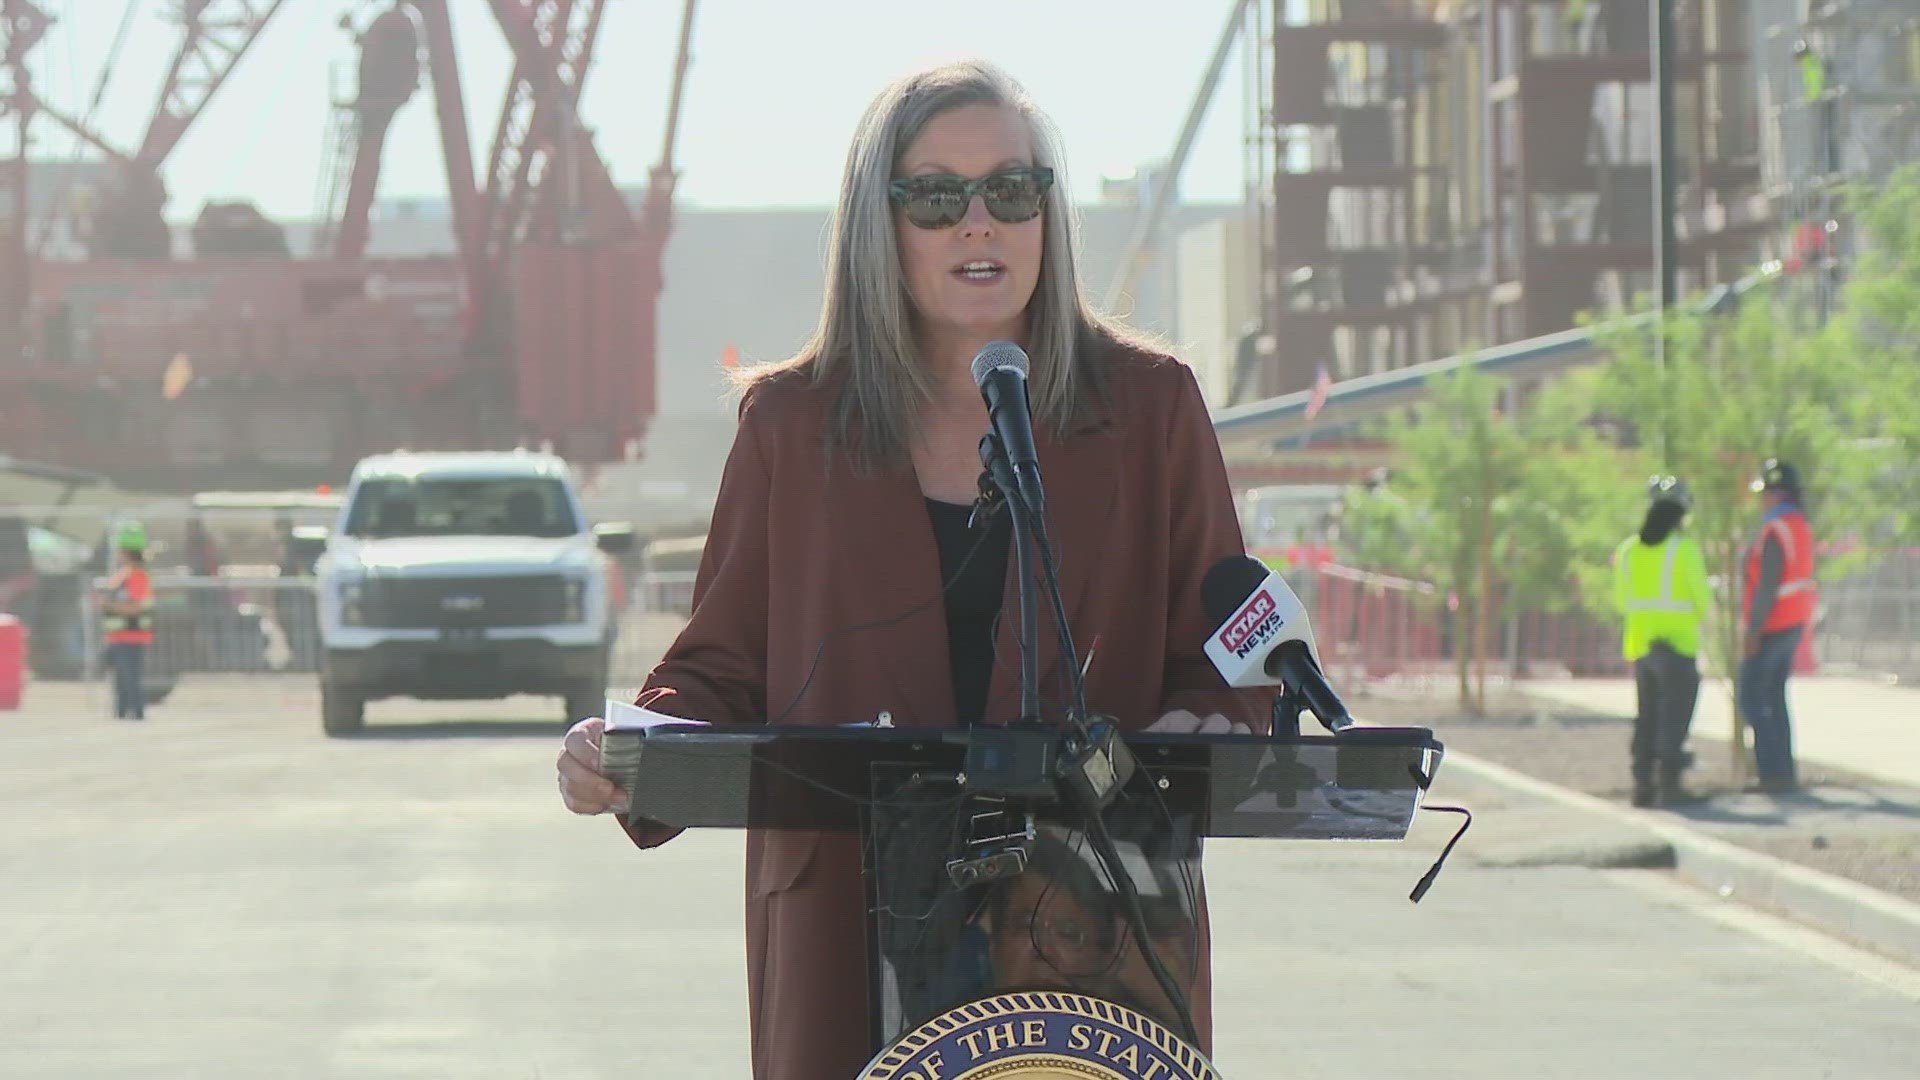 Gov. Katie Hobbs signed a voluntary safety agreement aimed at protecting workers at the TSMC site in north Phoenix.